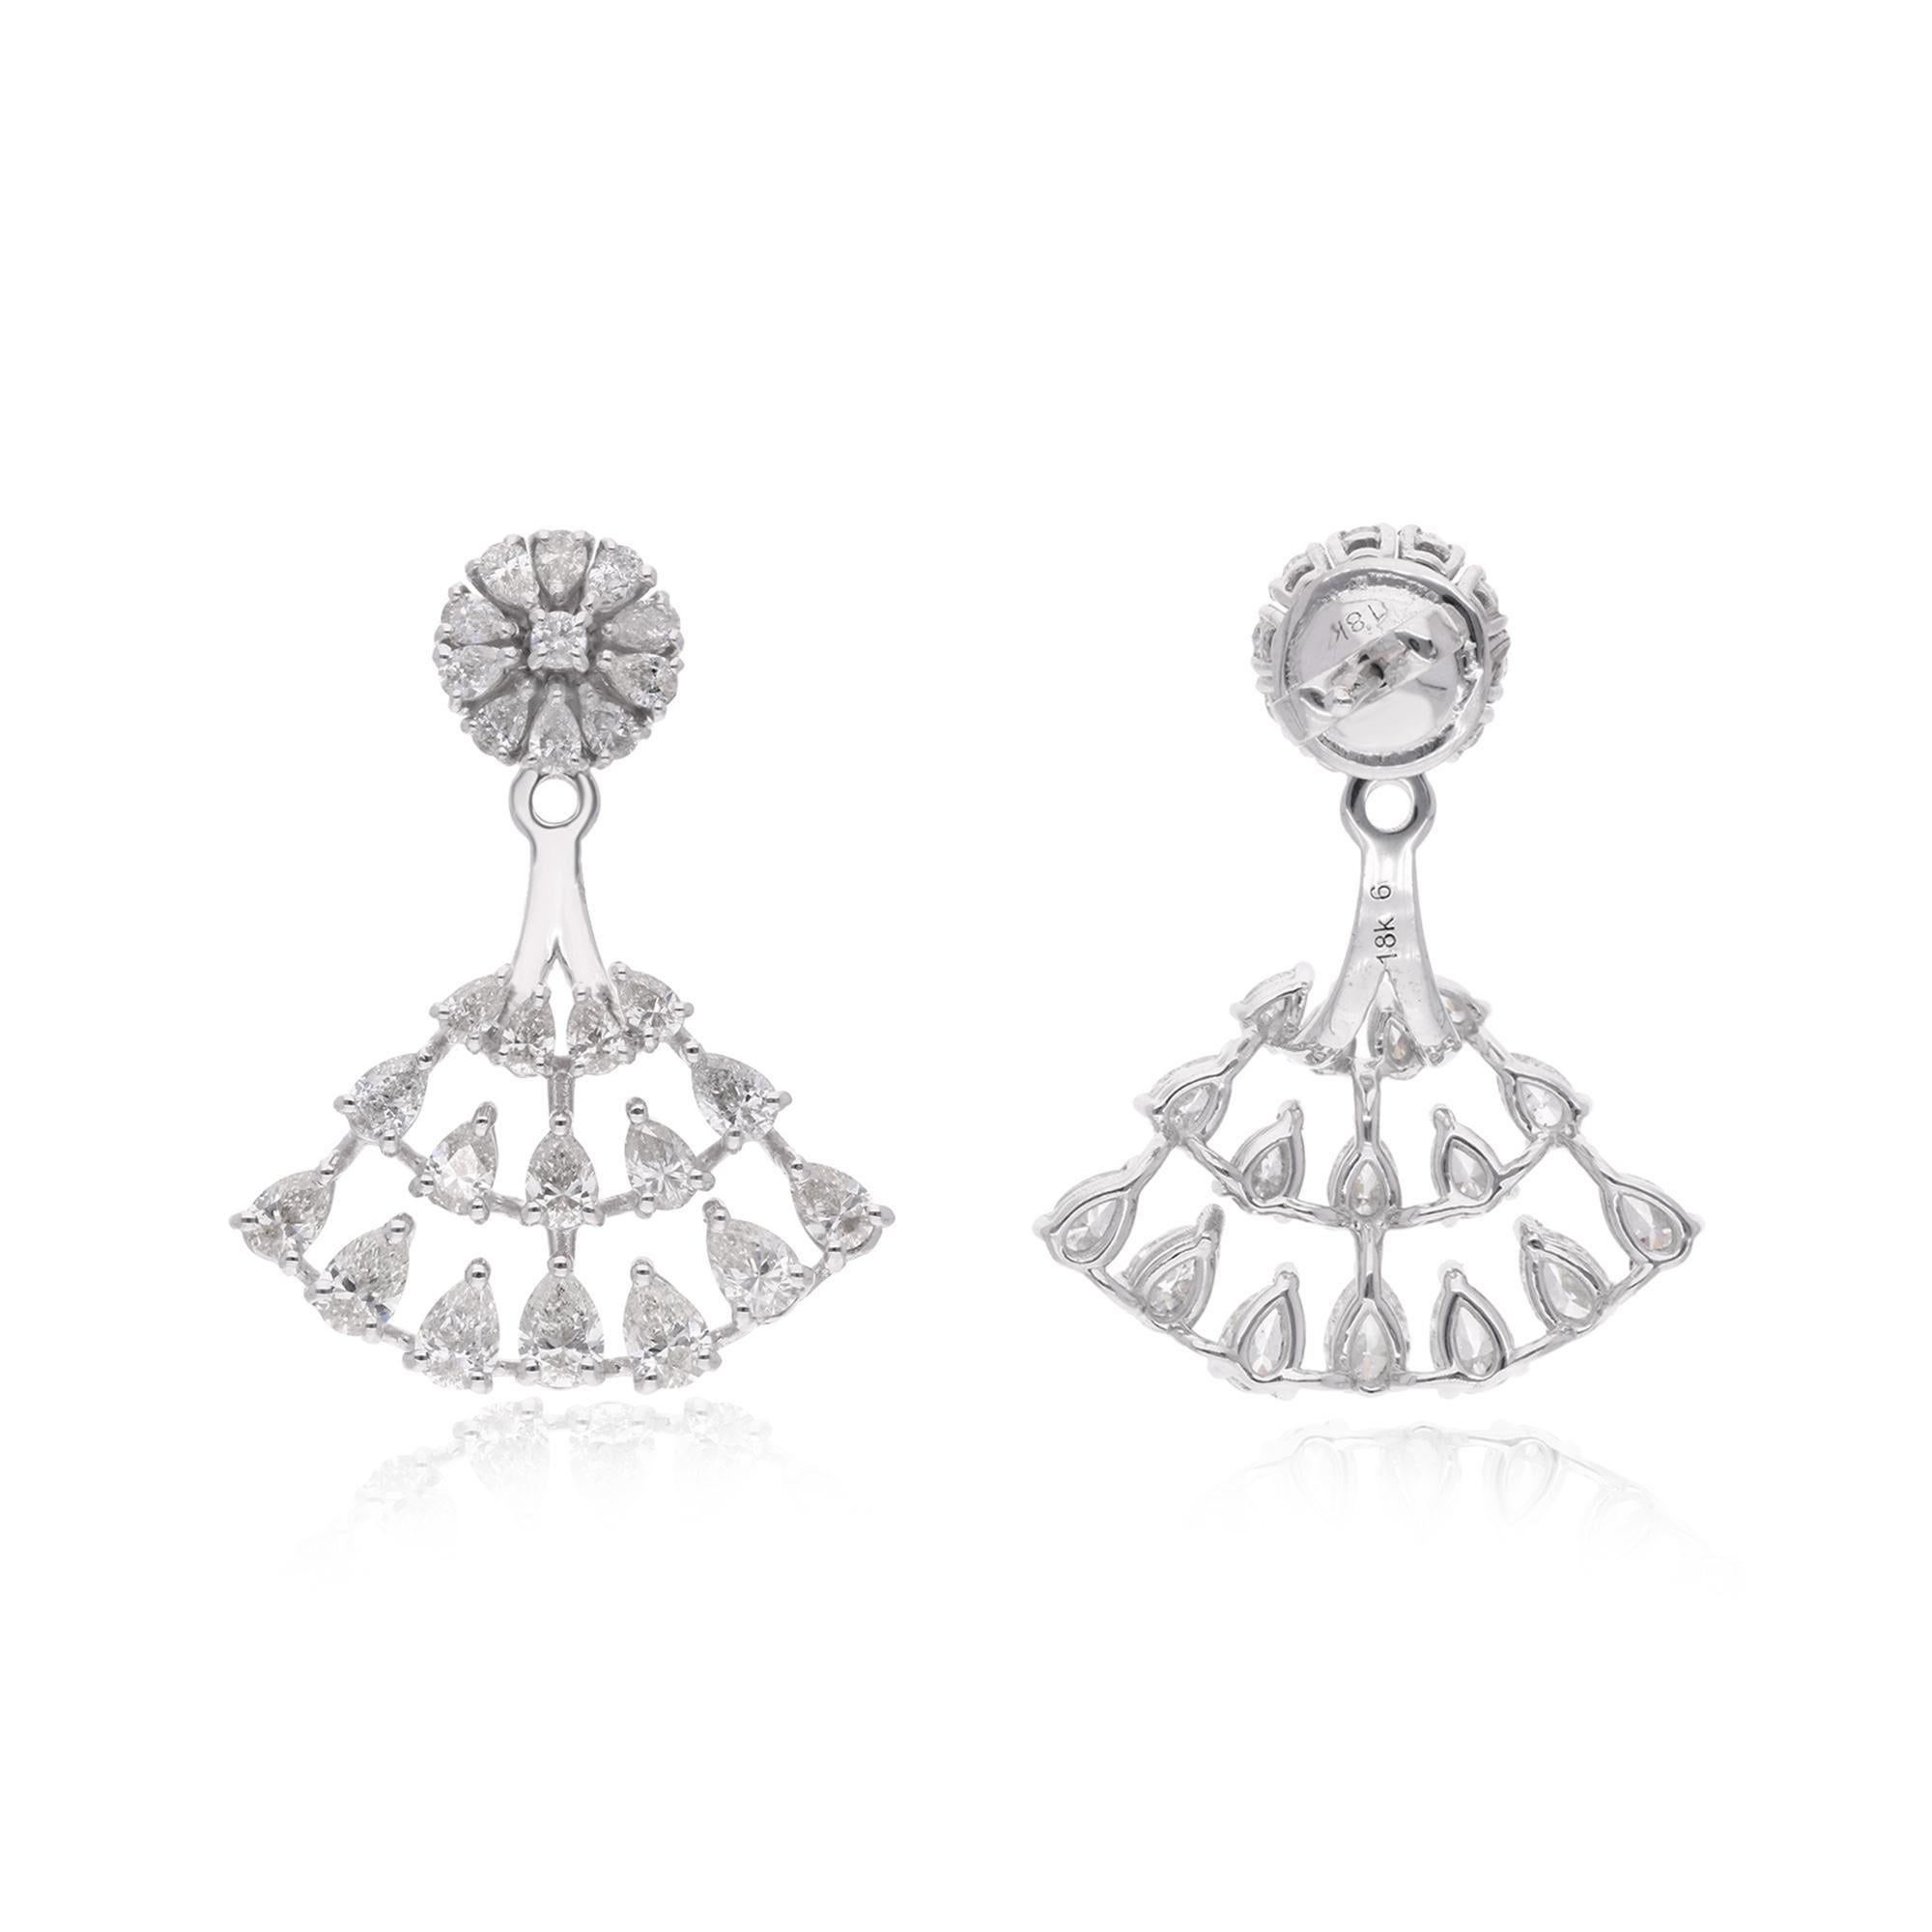 Add a touch of elegance and brilliance to your ensemble with these stunning Diamond Ear Jacket Earrings. Handcrafted with care and designed to impress, each earring features beautiful round & pear cut diamonds. These earrings are available in